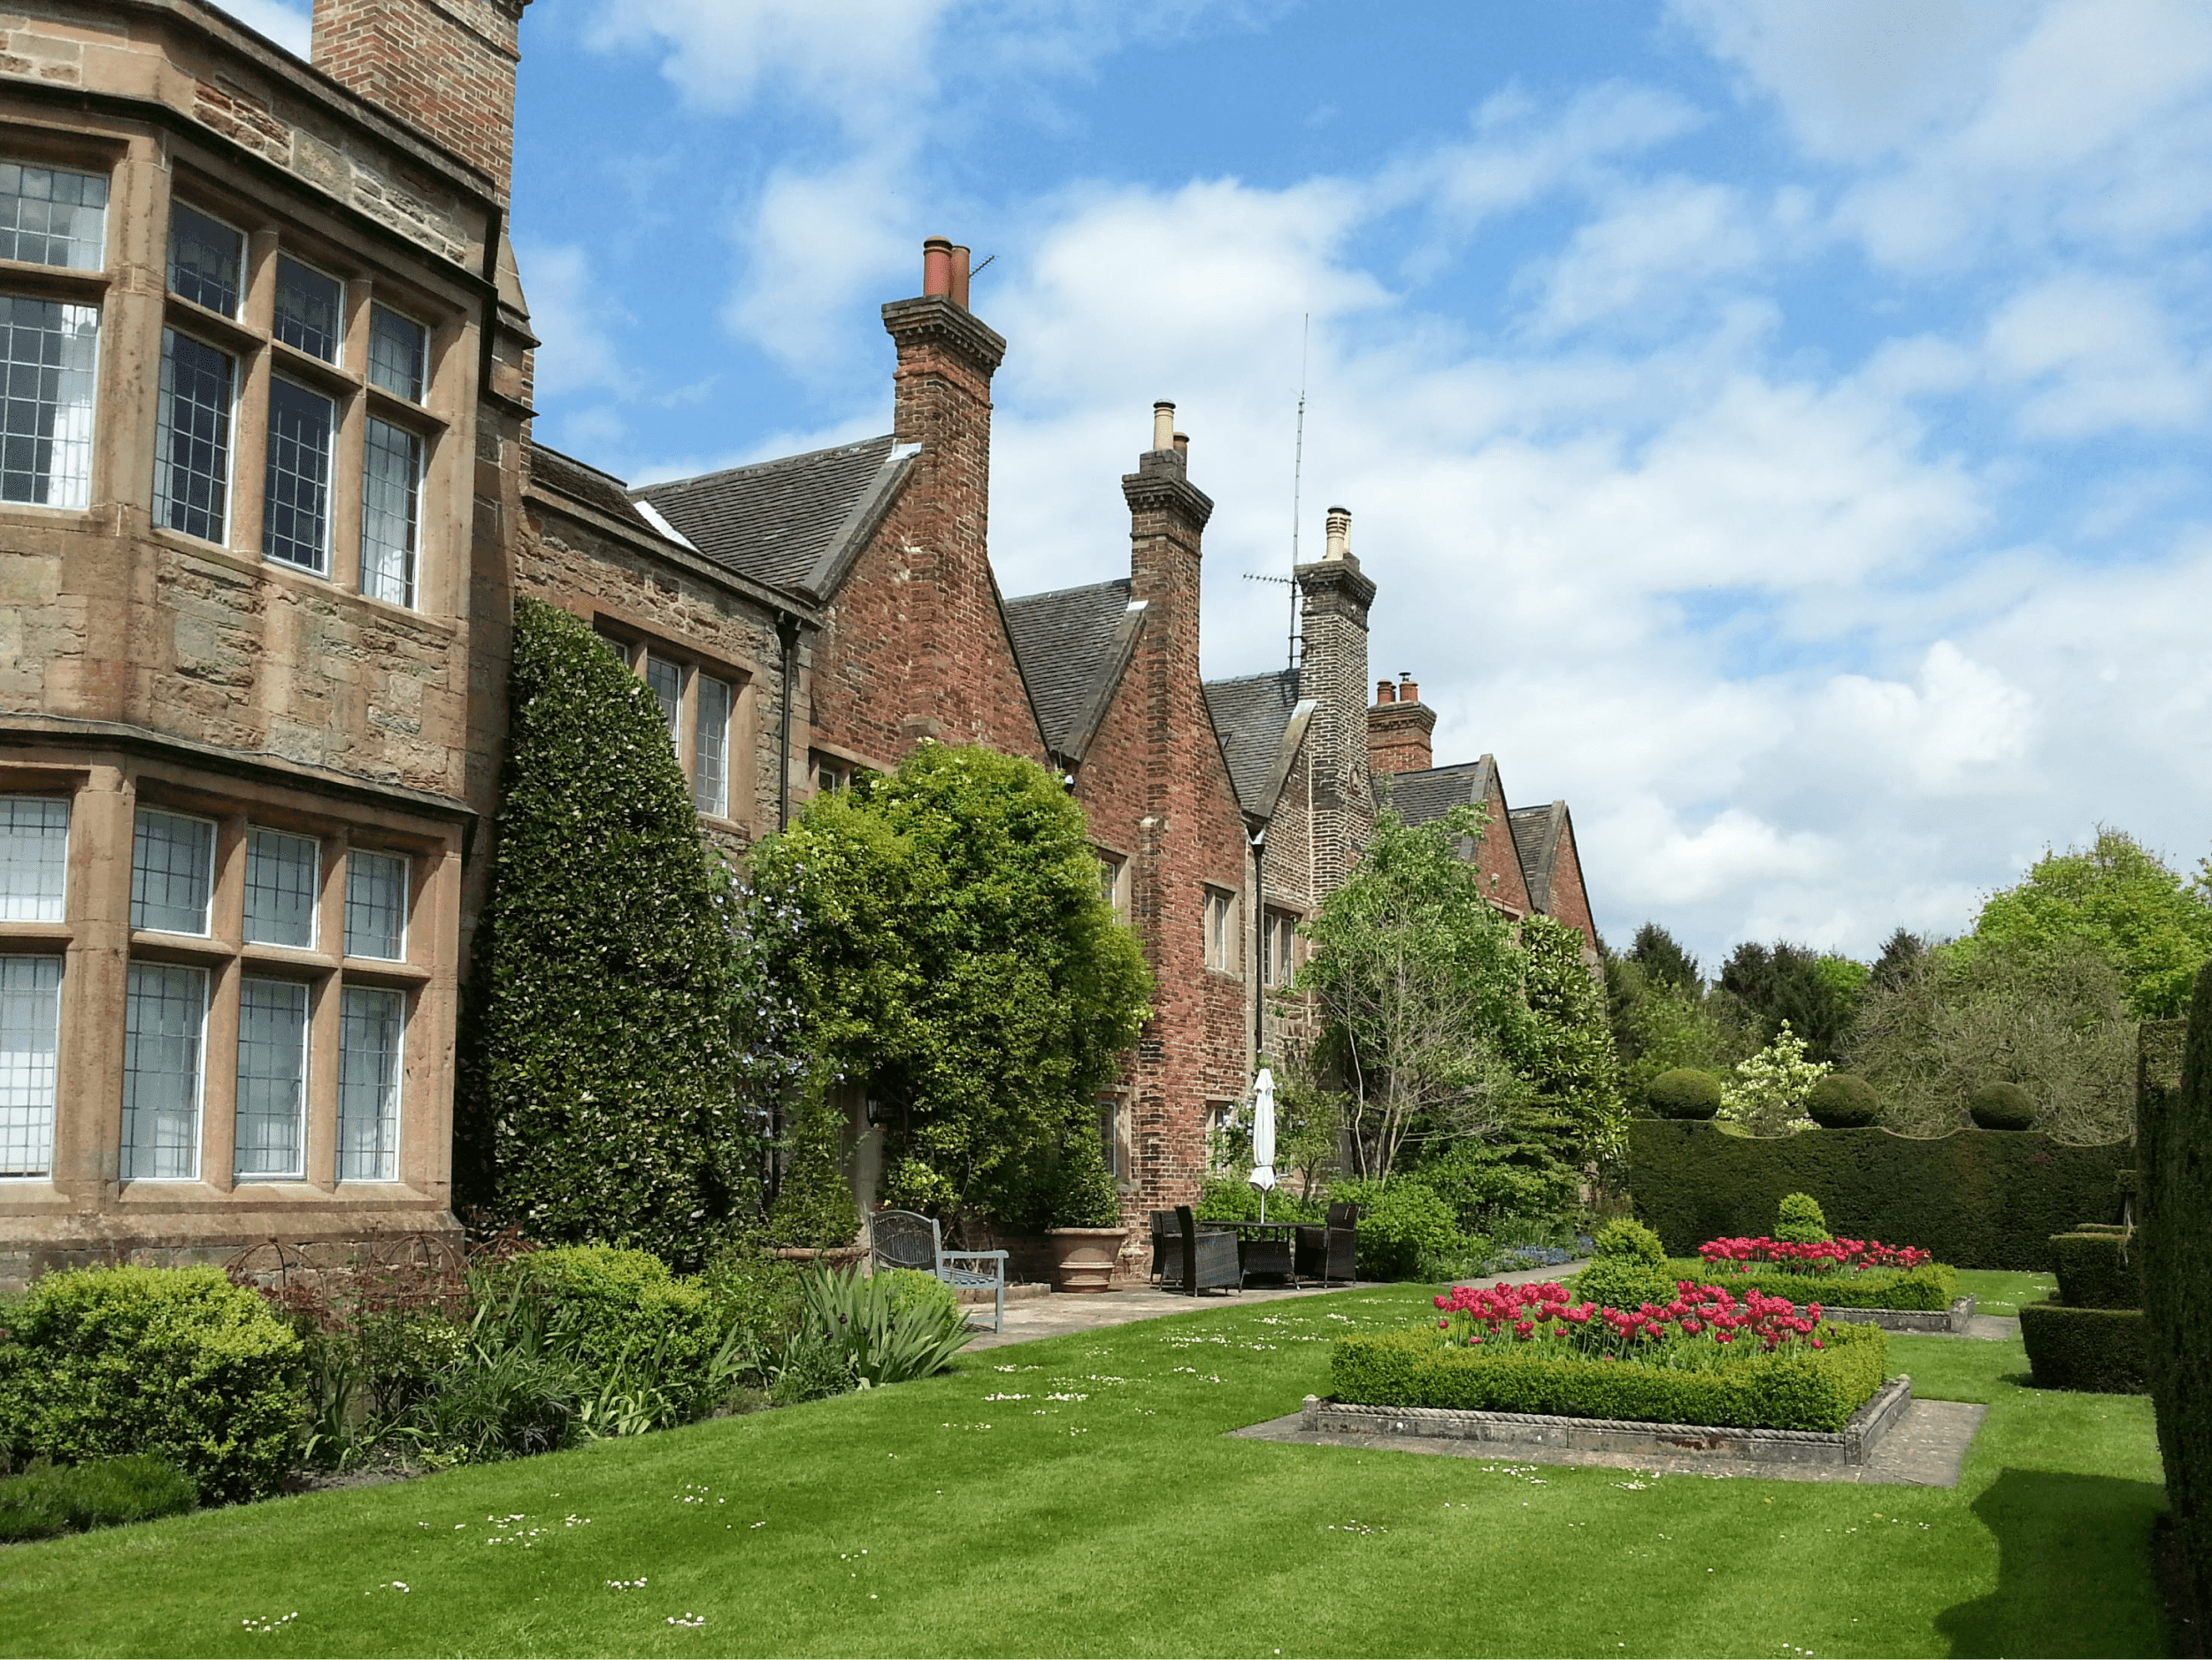 Image of Felley Priory